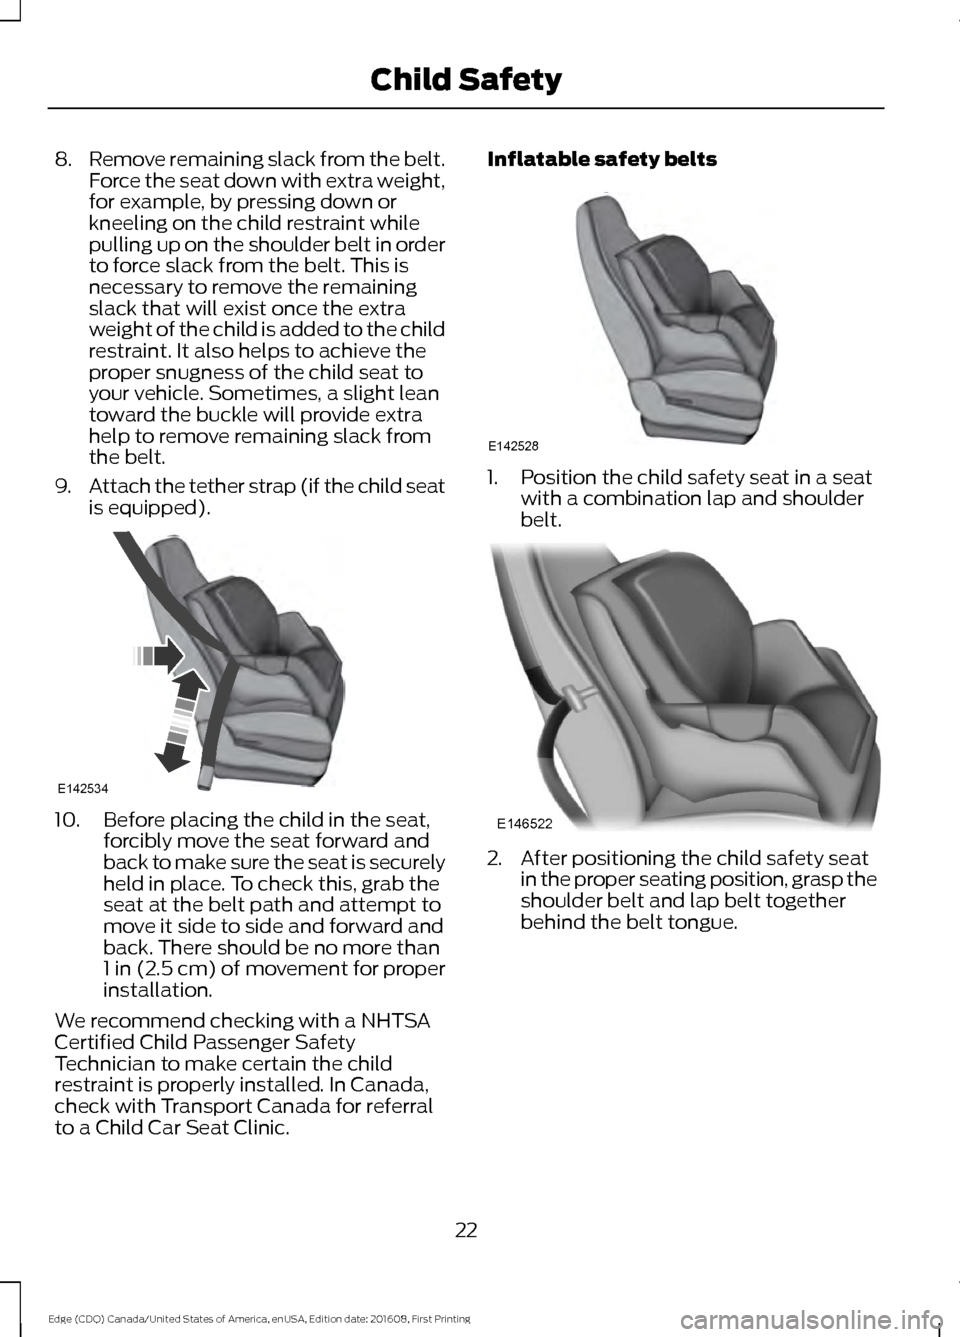 FORD EDGE 2017 2.G Owners Manual 8.
Remove remaining slack from the belt.
Force the seat down with extra weight,
for example, by pressing down or
kneeling on the child restraint while
pulling up on the shoulder belt in order
to force